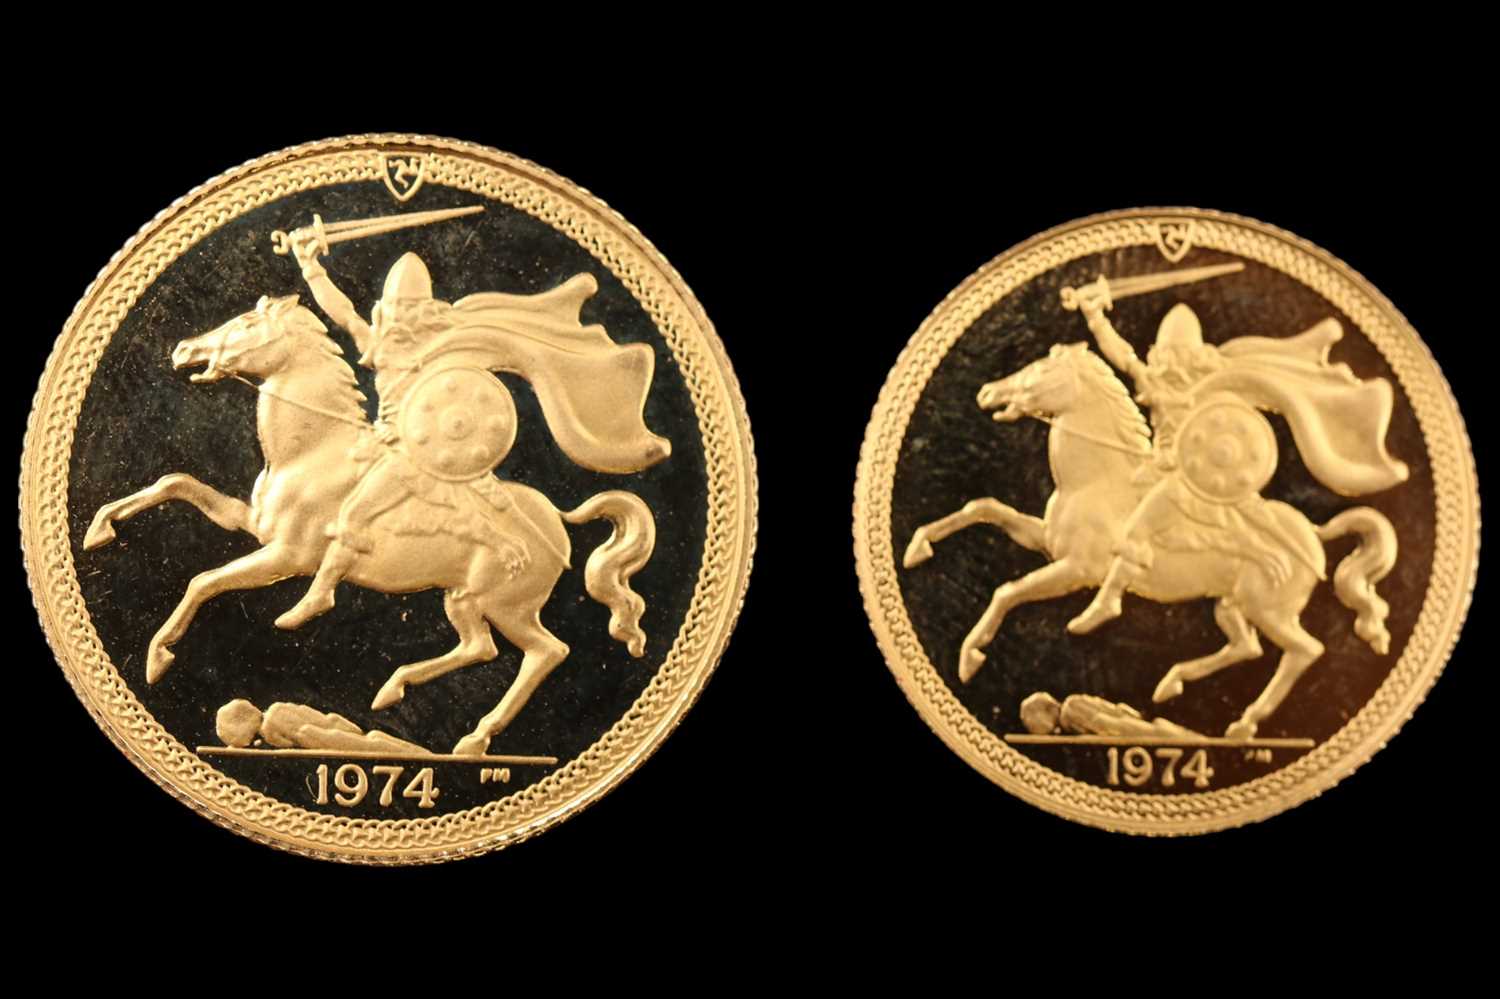 An Elizabeth II 1974 limited edition Isle of Man gold coin proof set, including £5, £2, sovereign - Image 5 of 6